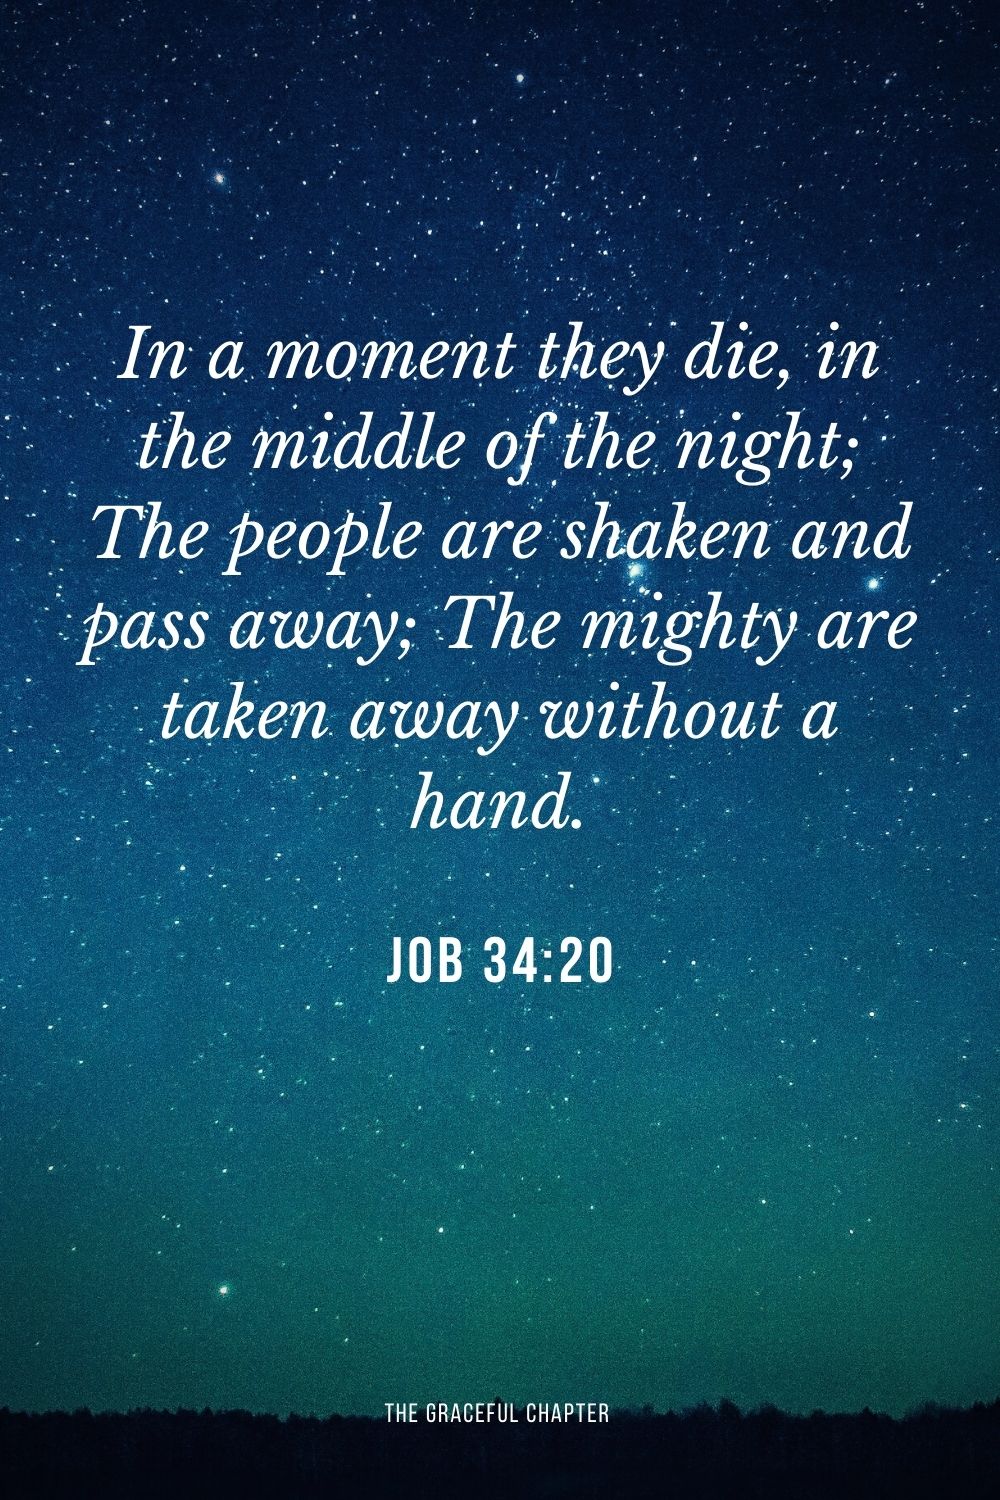 In a moment they die, in the middle of the night; The people are shaken and pass away; The mighty are taken away without a hand. Job 34:20